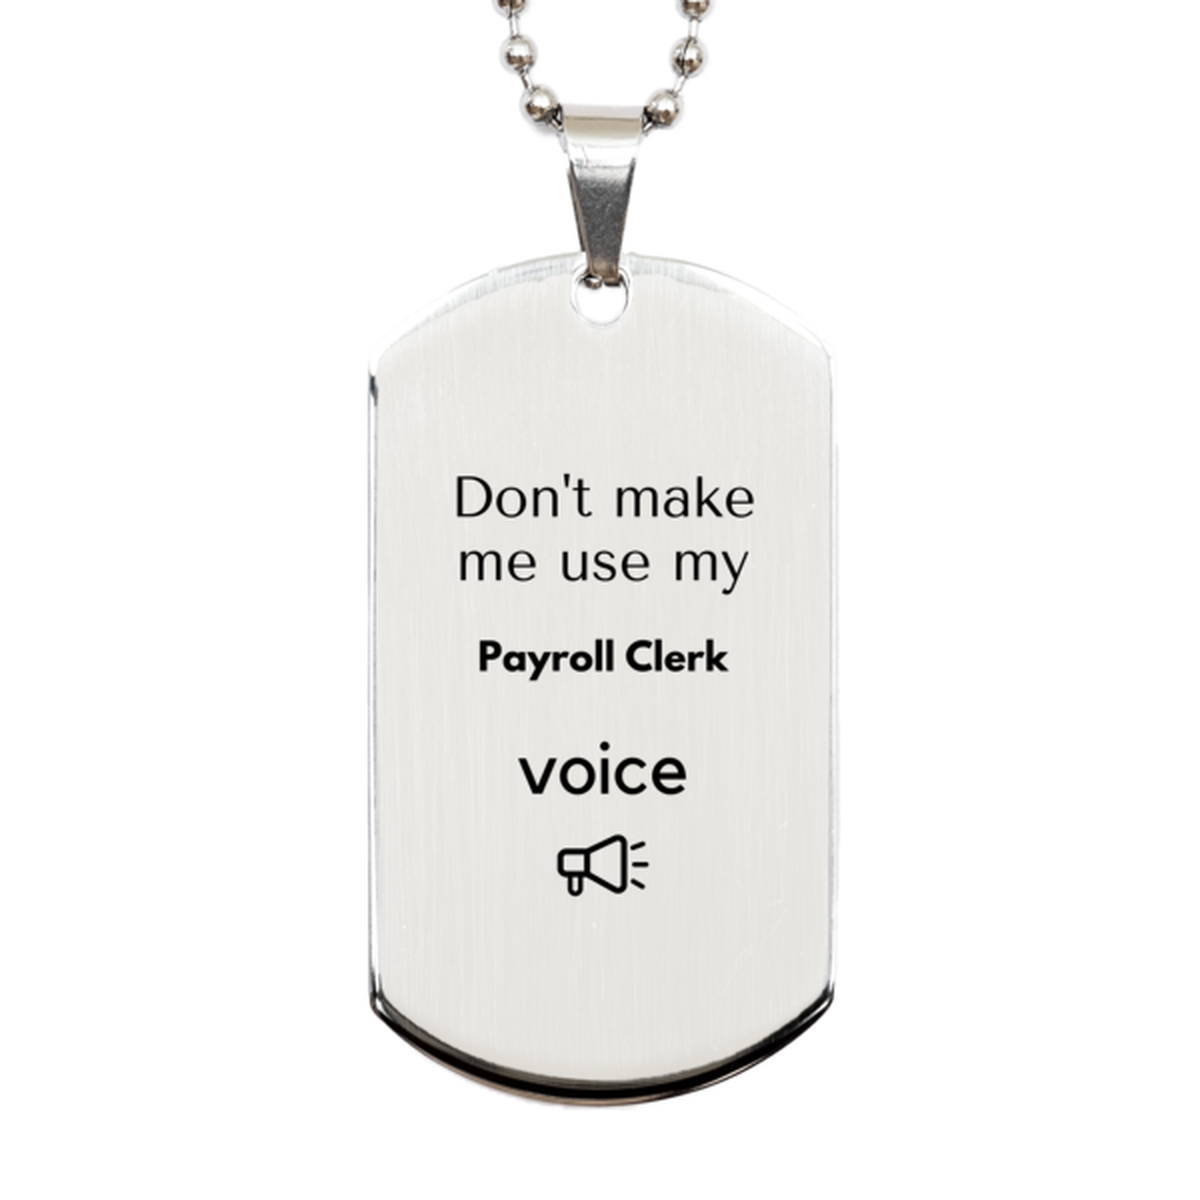 Don't make me use my Payroll Clerk voice, Sarcasm Payroll Clerk Gifts, Christmas Payroll Clerk Silver Dog Tag Birthday Unique Gifts For Payroll Clerk Coworkers, Men, Women, Colleague, Friends